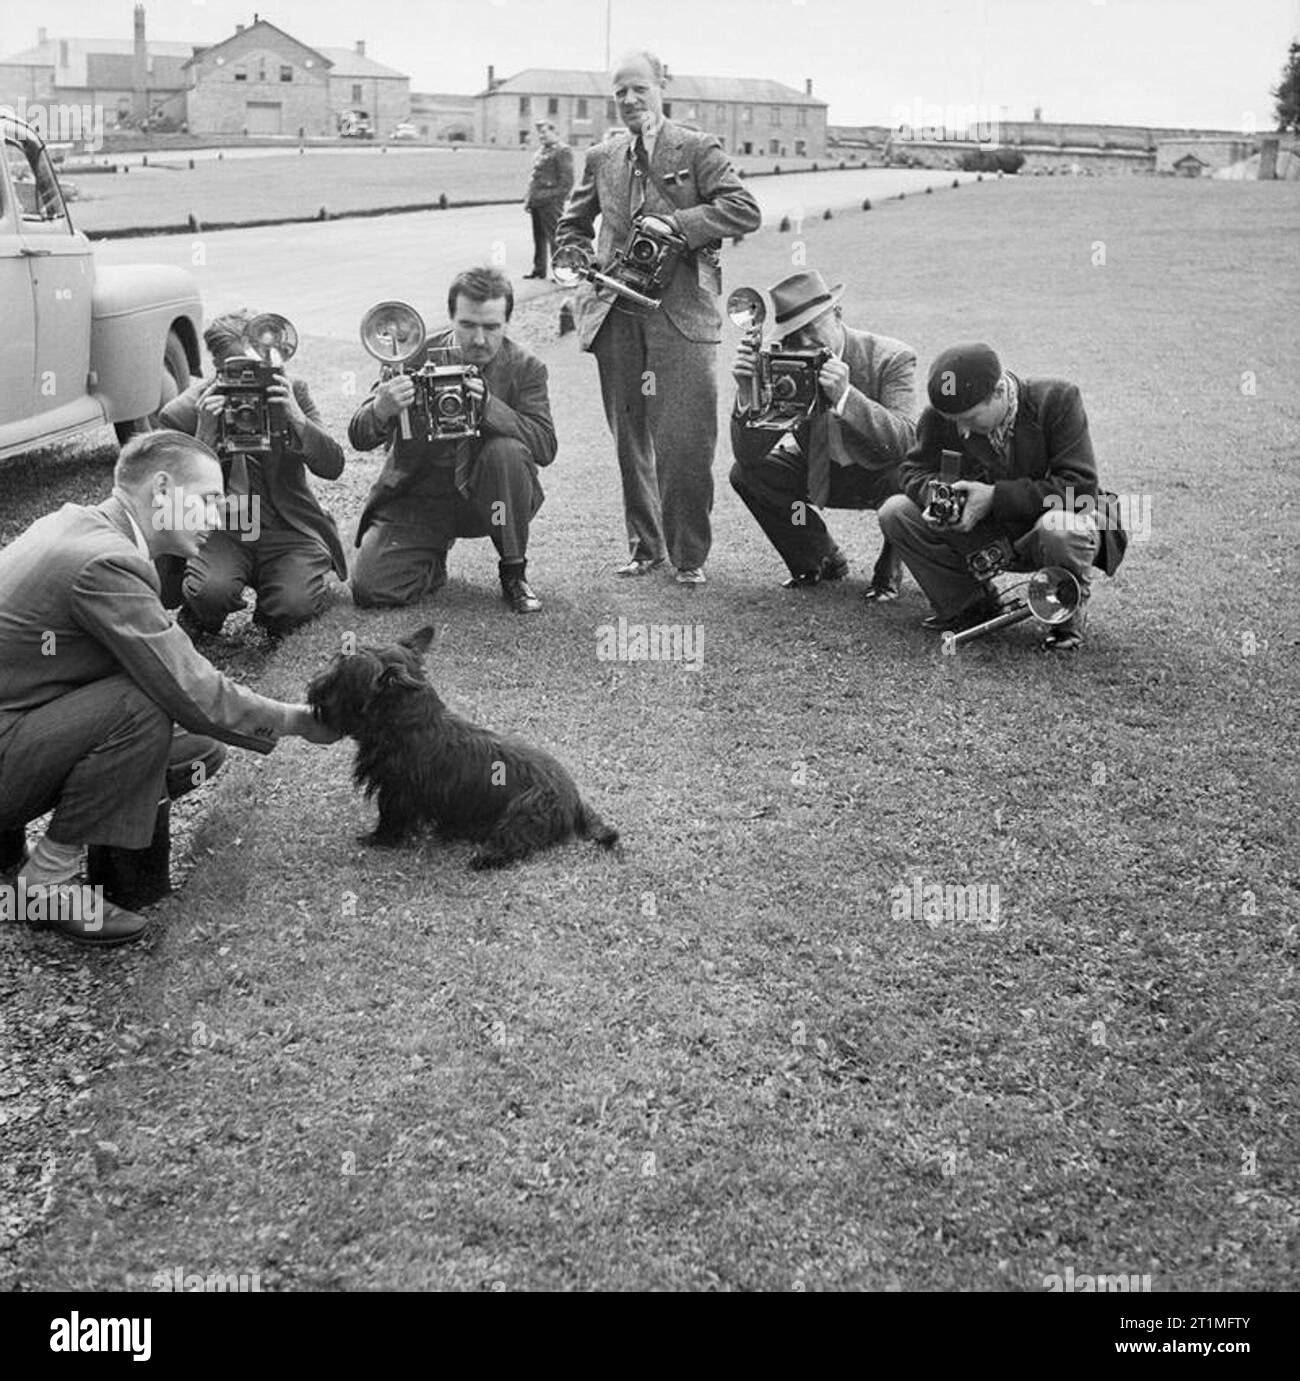 The Quebec Conference, August 1943 President Roosevelt's pet dog 'Falla' poses for a battery of press photographers while they wait for news of the deliberations at the Quebec Conference. They in turn are photographed by the War Office official photographer. Stock Photo